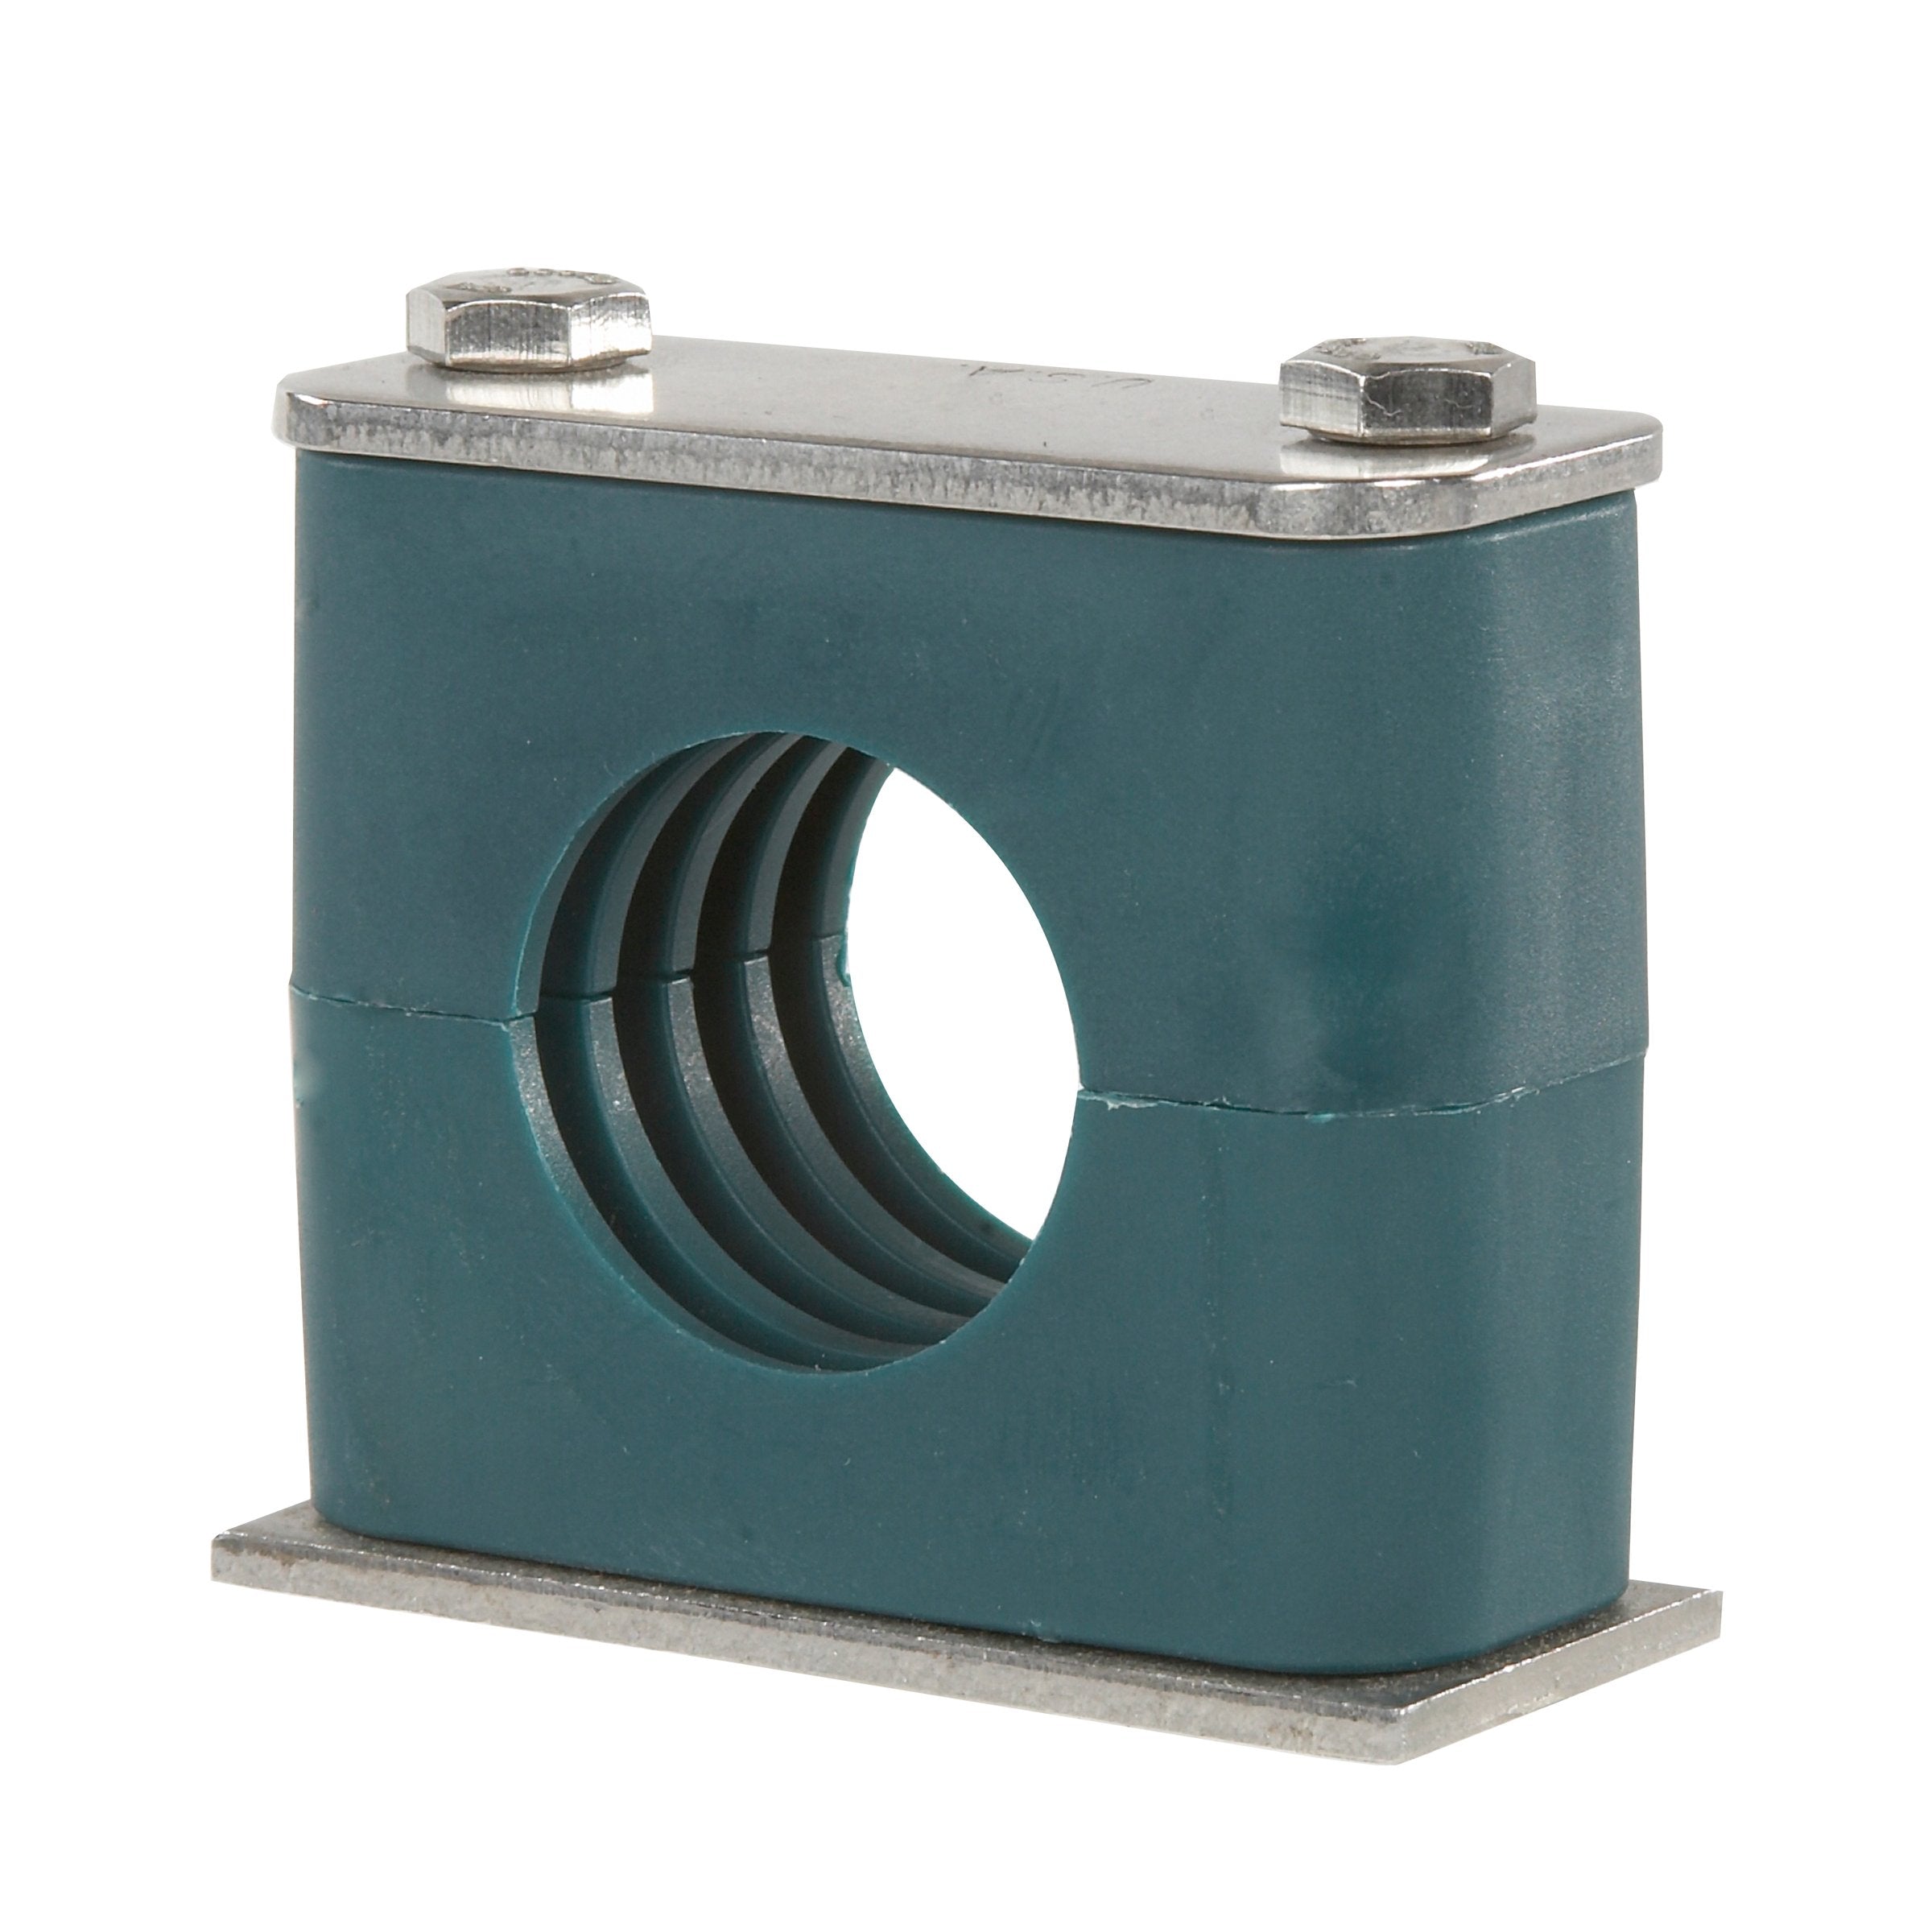 SP-106.4A-PP-DP-AS-U-W10 : Stauff Clamp, Single Weld Plate, 0.25 inch (6.4mm) OD, for 1/4" Tube, Green PP Insert, Profiled Interior, Carbon Steel